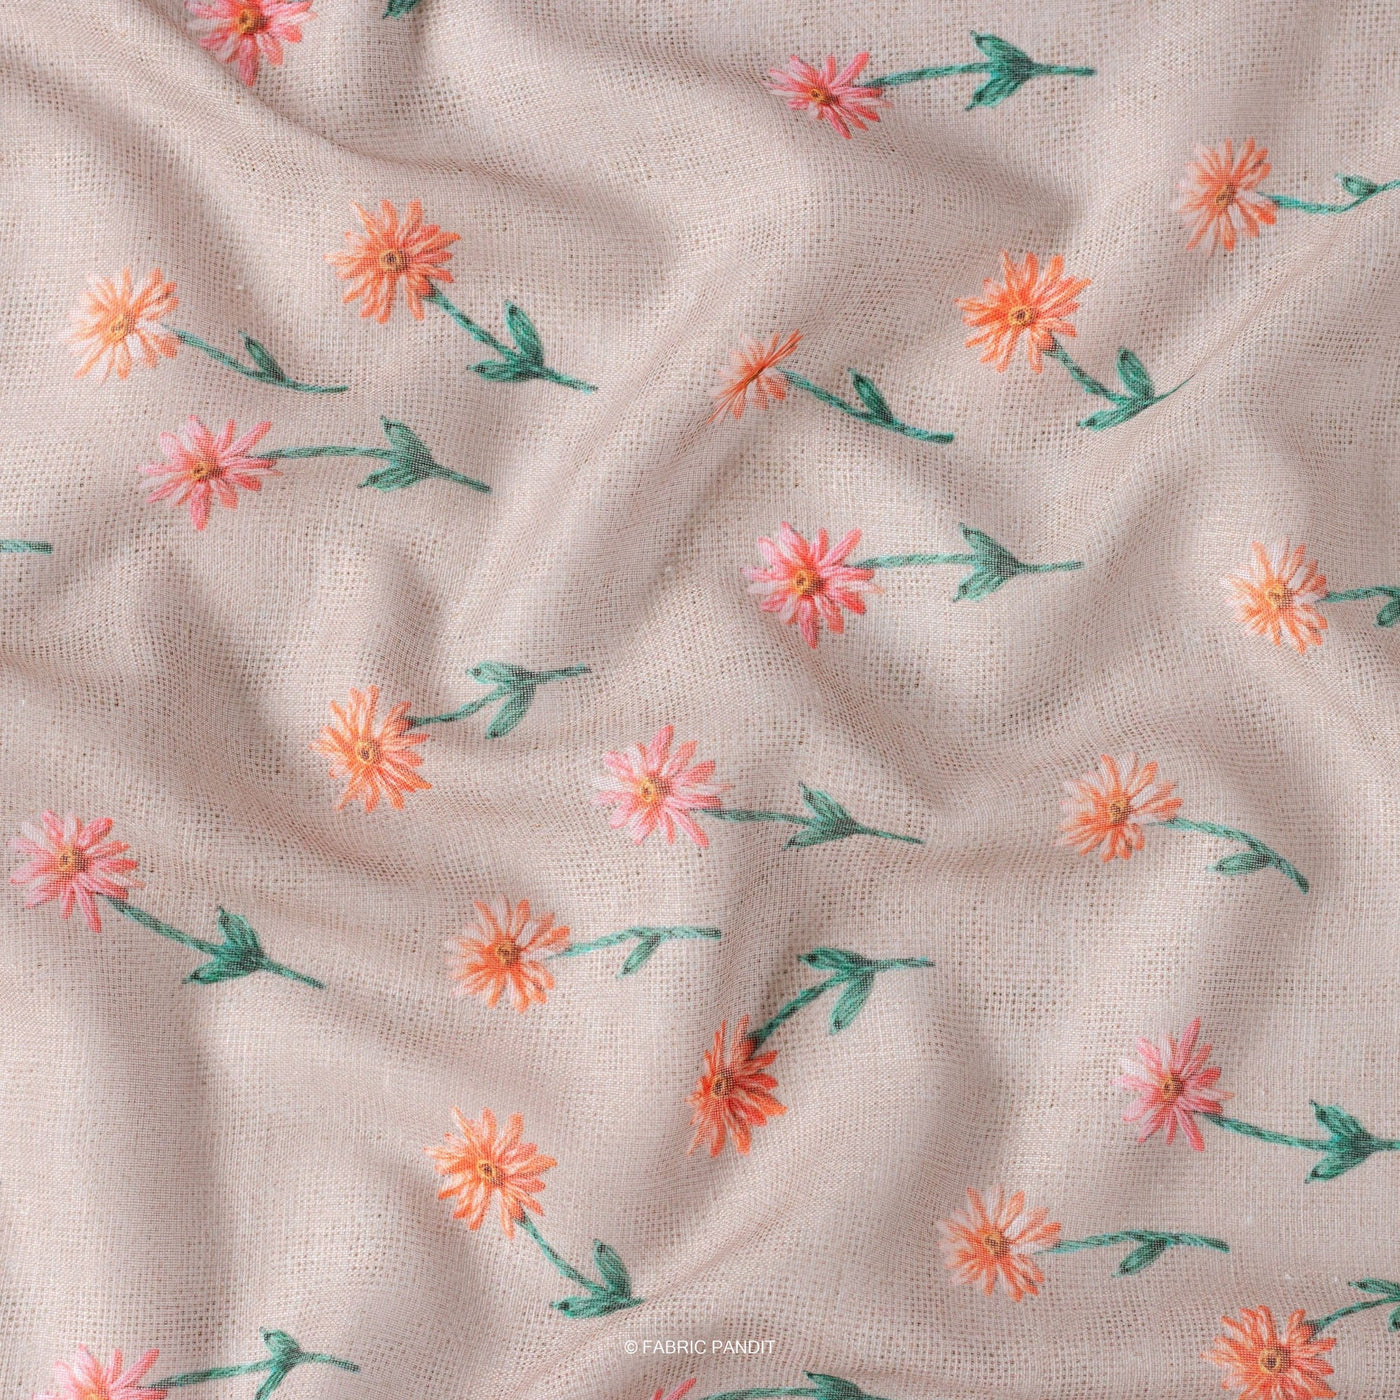 Fabric Pandit Cut Piece (Cut Piece) Dusty Grey and Orange Daisies Digital Printed Linen Neps Fabric (Width 44 Inches)